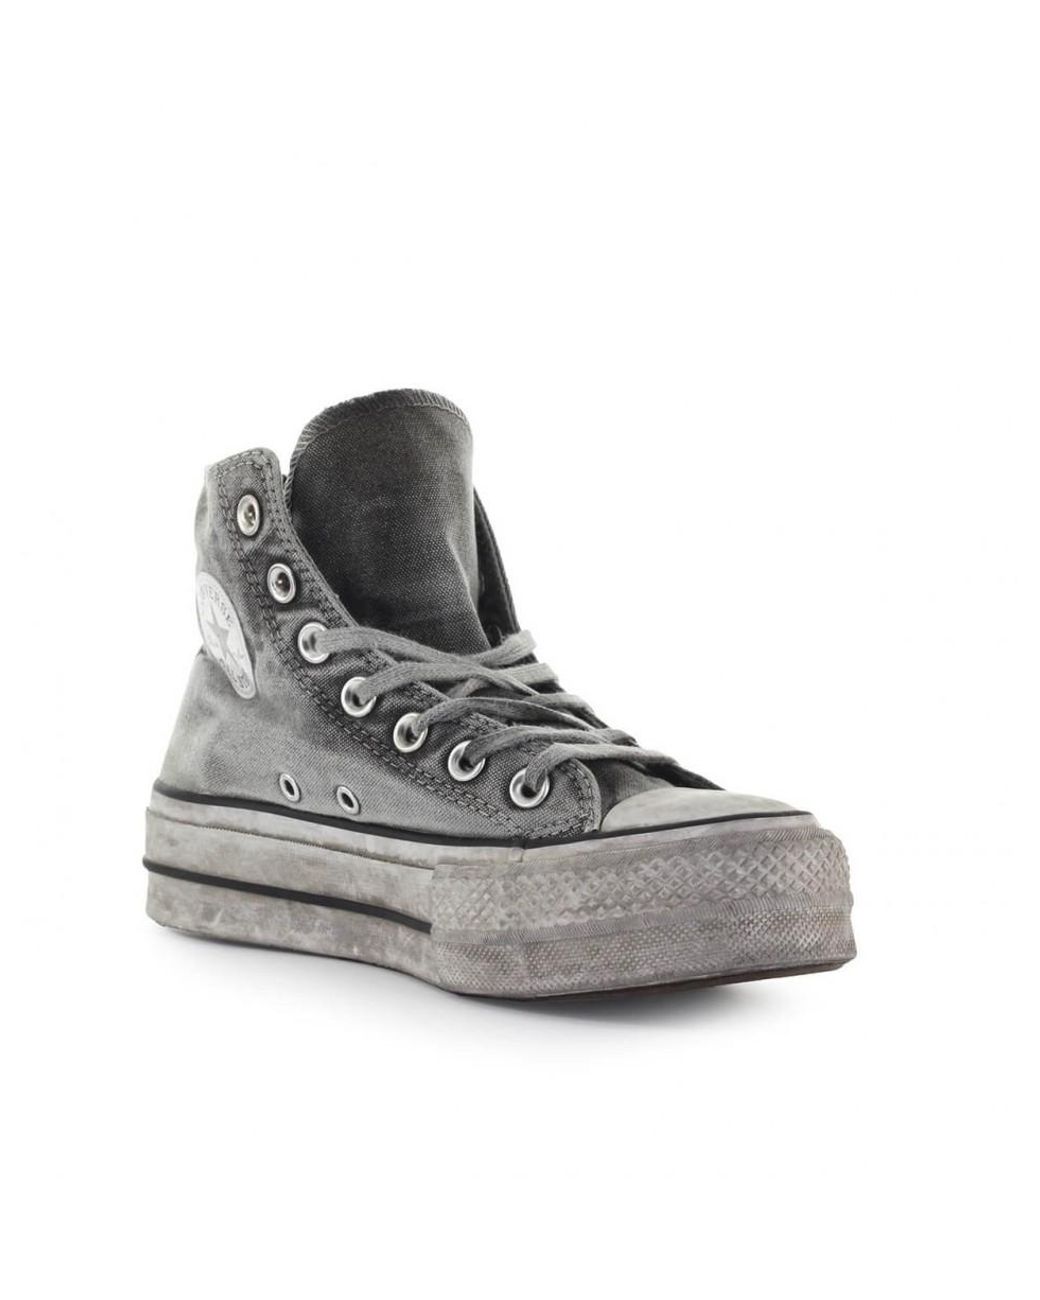 Converse All Star Chuck Taylor Smoked Grey Sneaker in Grey | Lyst Canada